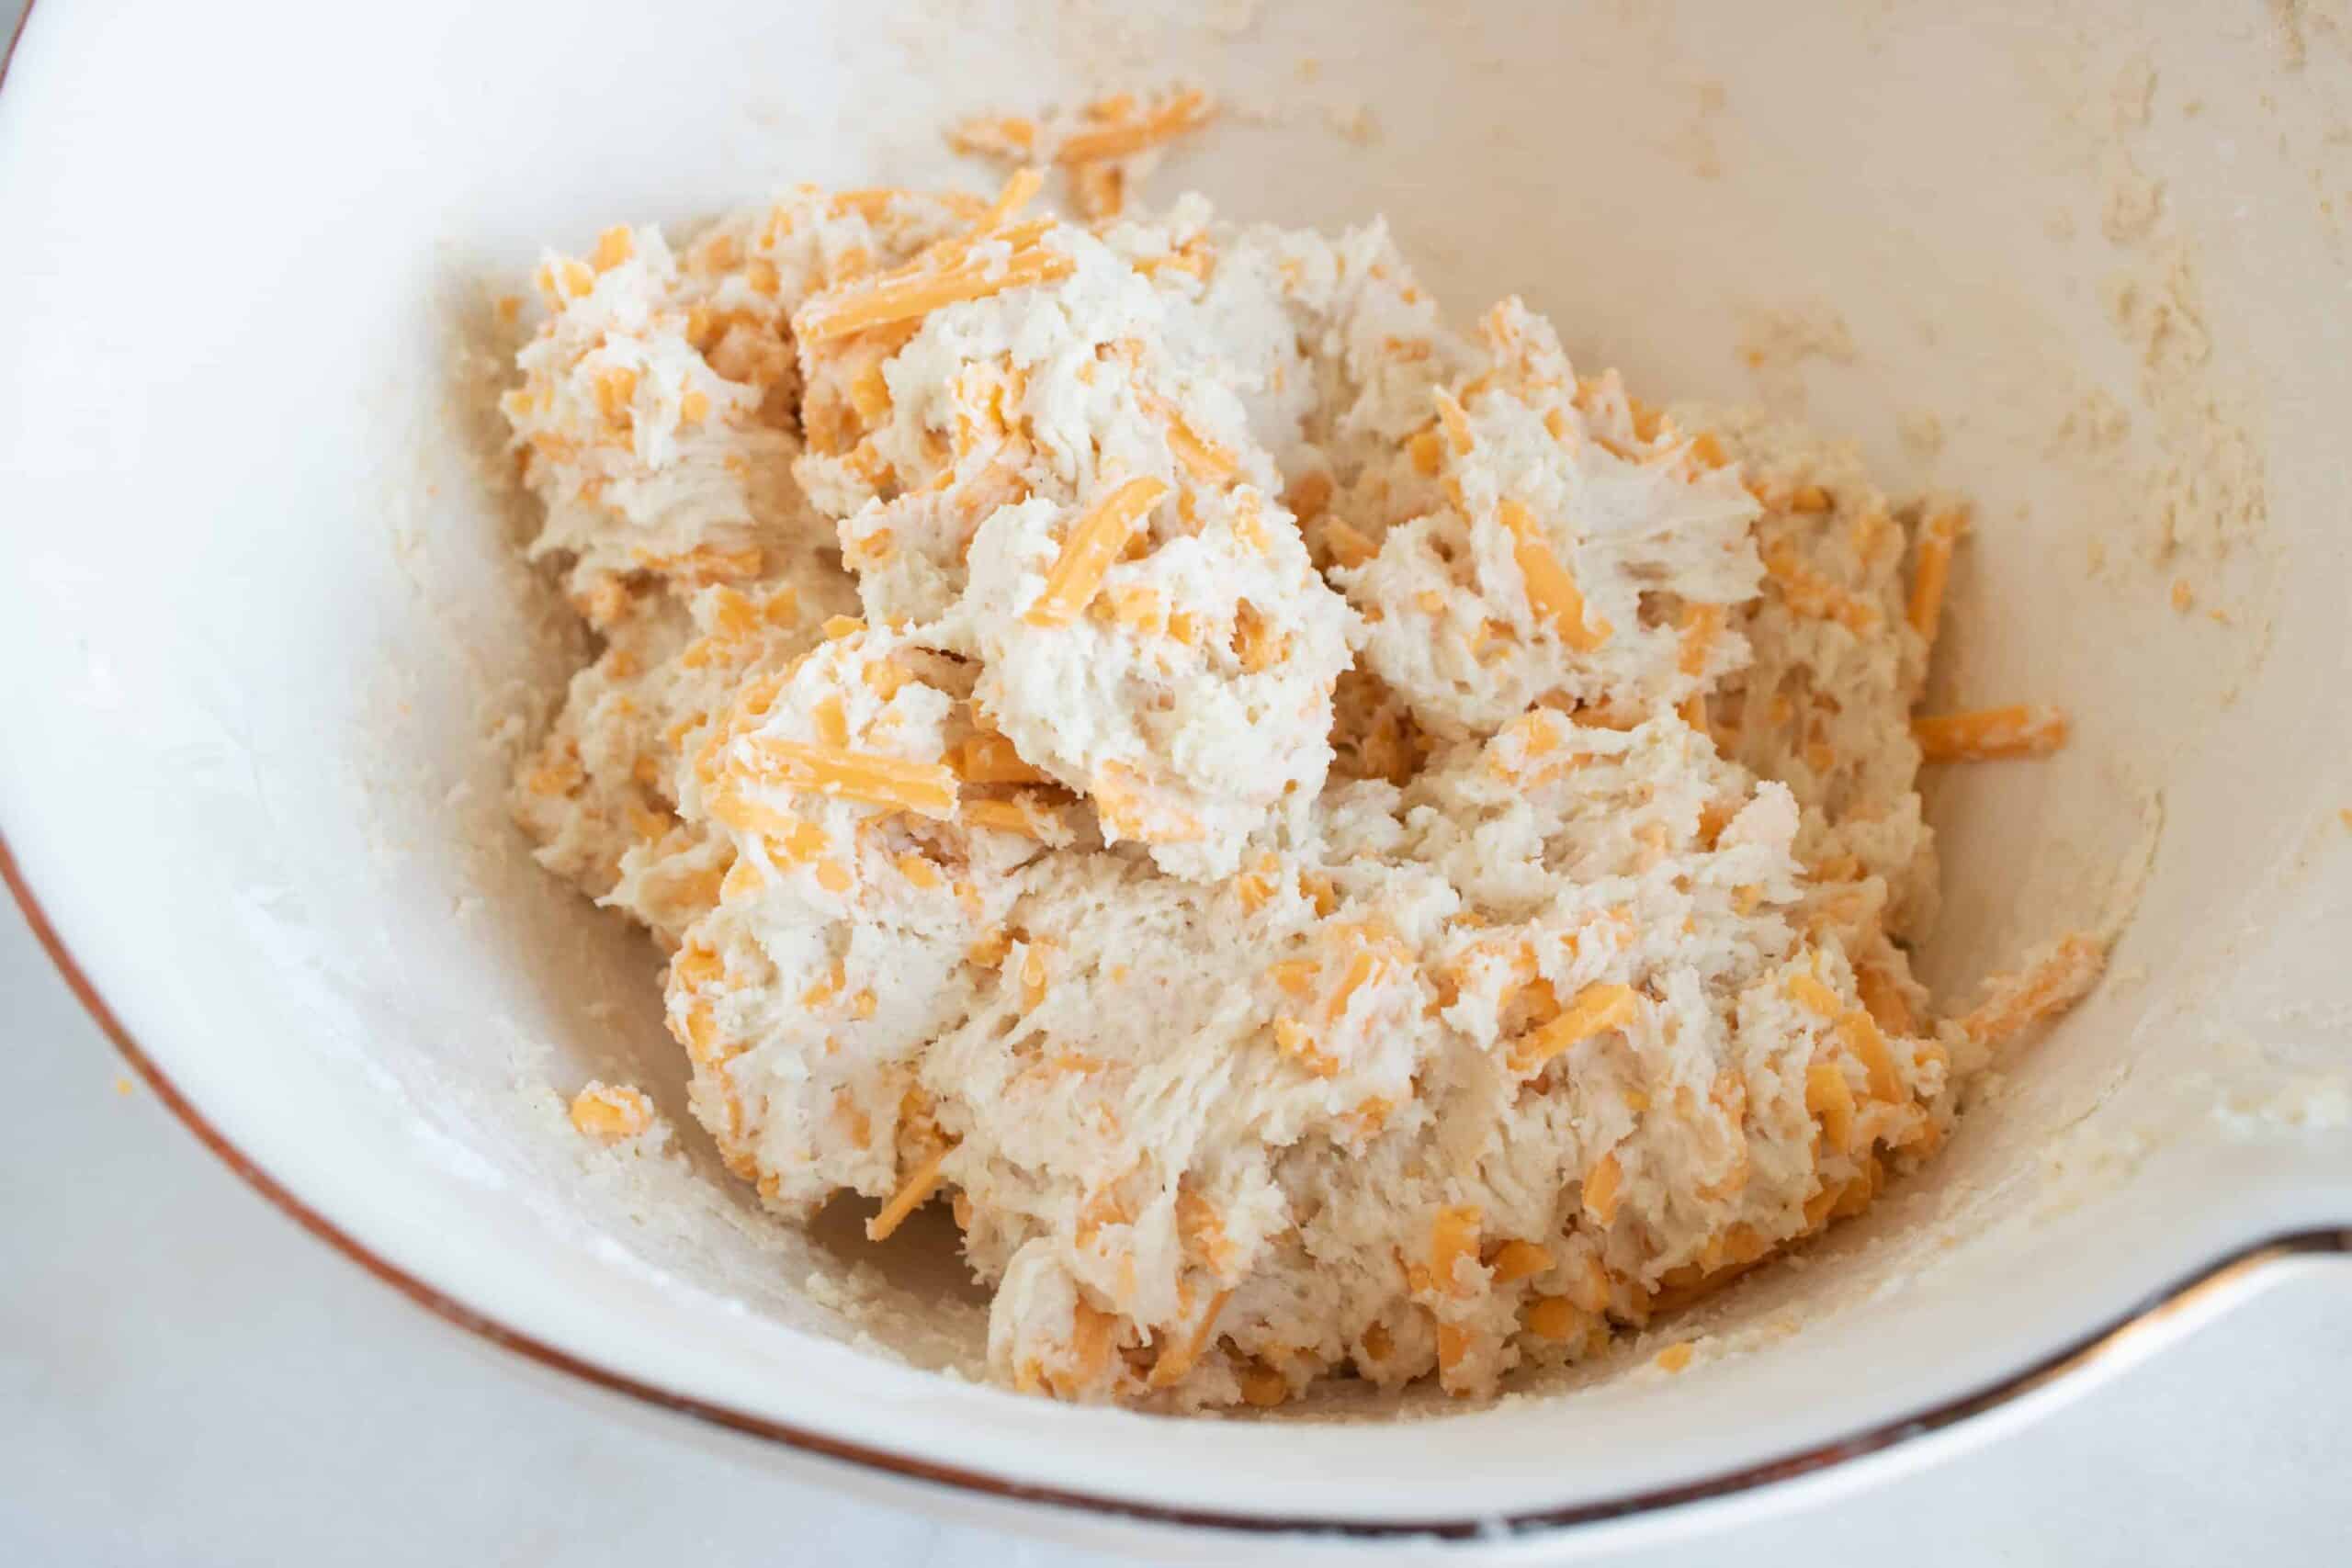 The dough for making Red Lobster Copycat Cheddar Biscuits